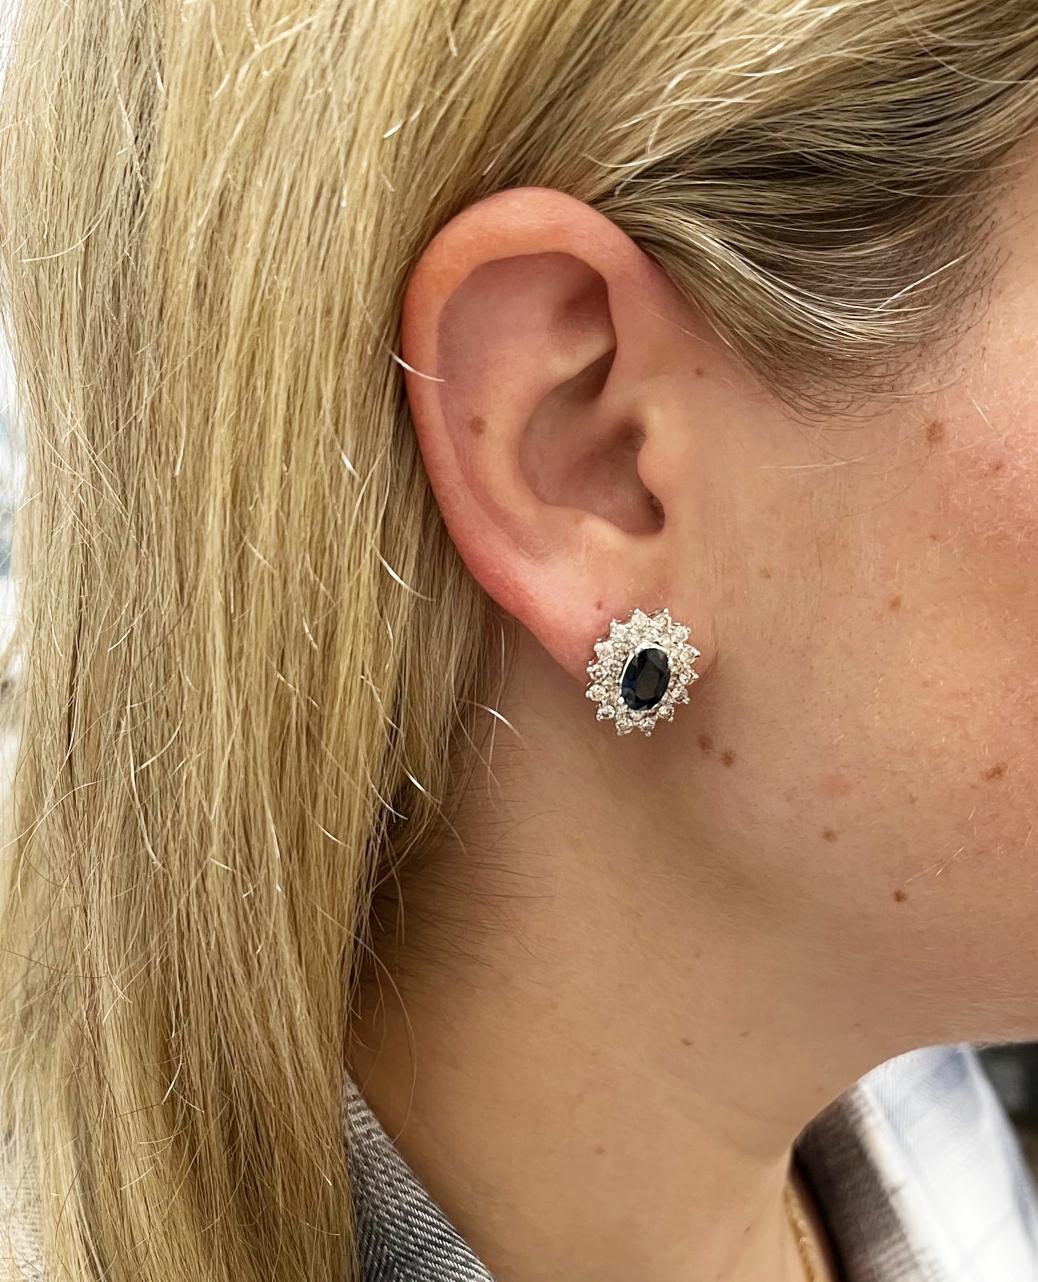 14 Karat White Gold Natural Diamond & Blue Sapphire Halo Cluster Earrings 
Metal: 14k white gold
Weight: 8.37 grams
Diamonds: Approx. 2.00 CTW I VS round natural diamonds
Sapphires: 2 oval blue sapphires, approx. 1.33 carats each 
Dimensions: 17 x